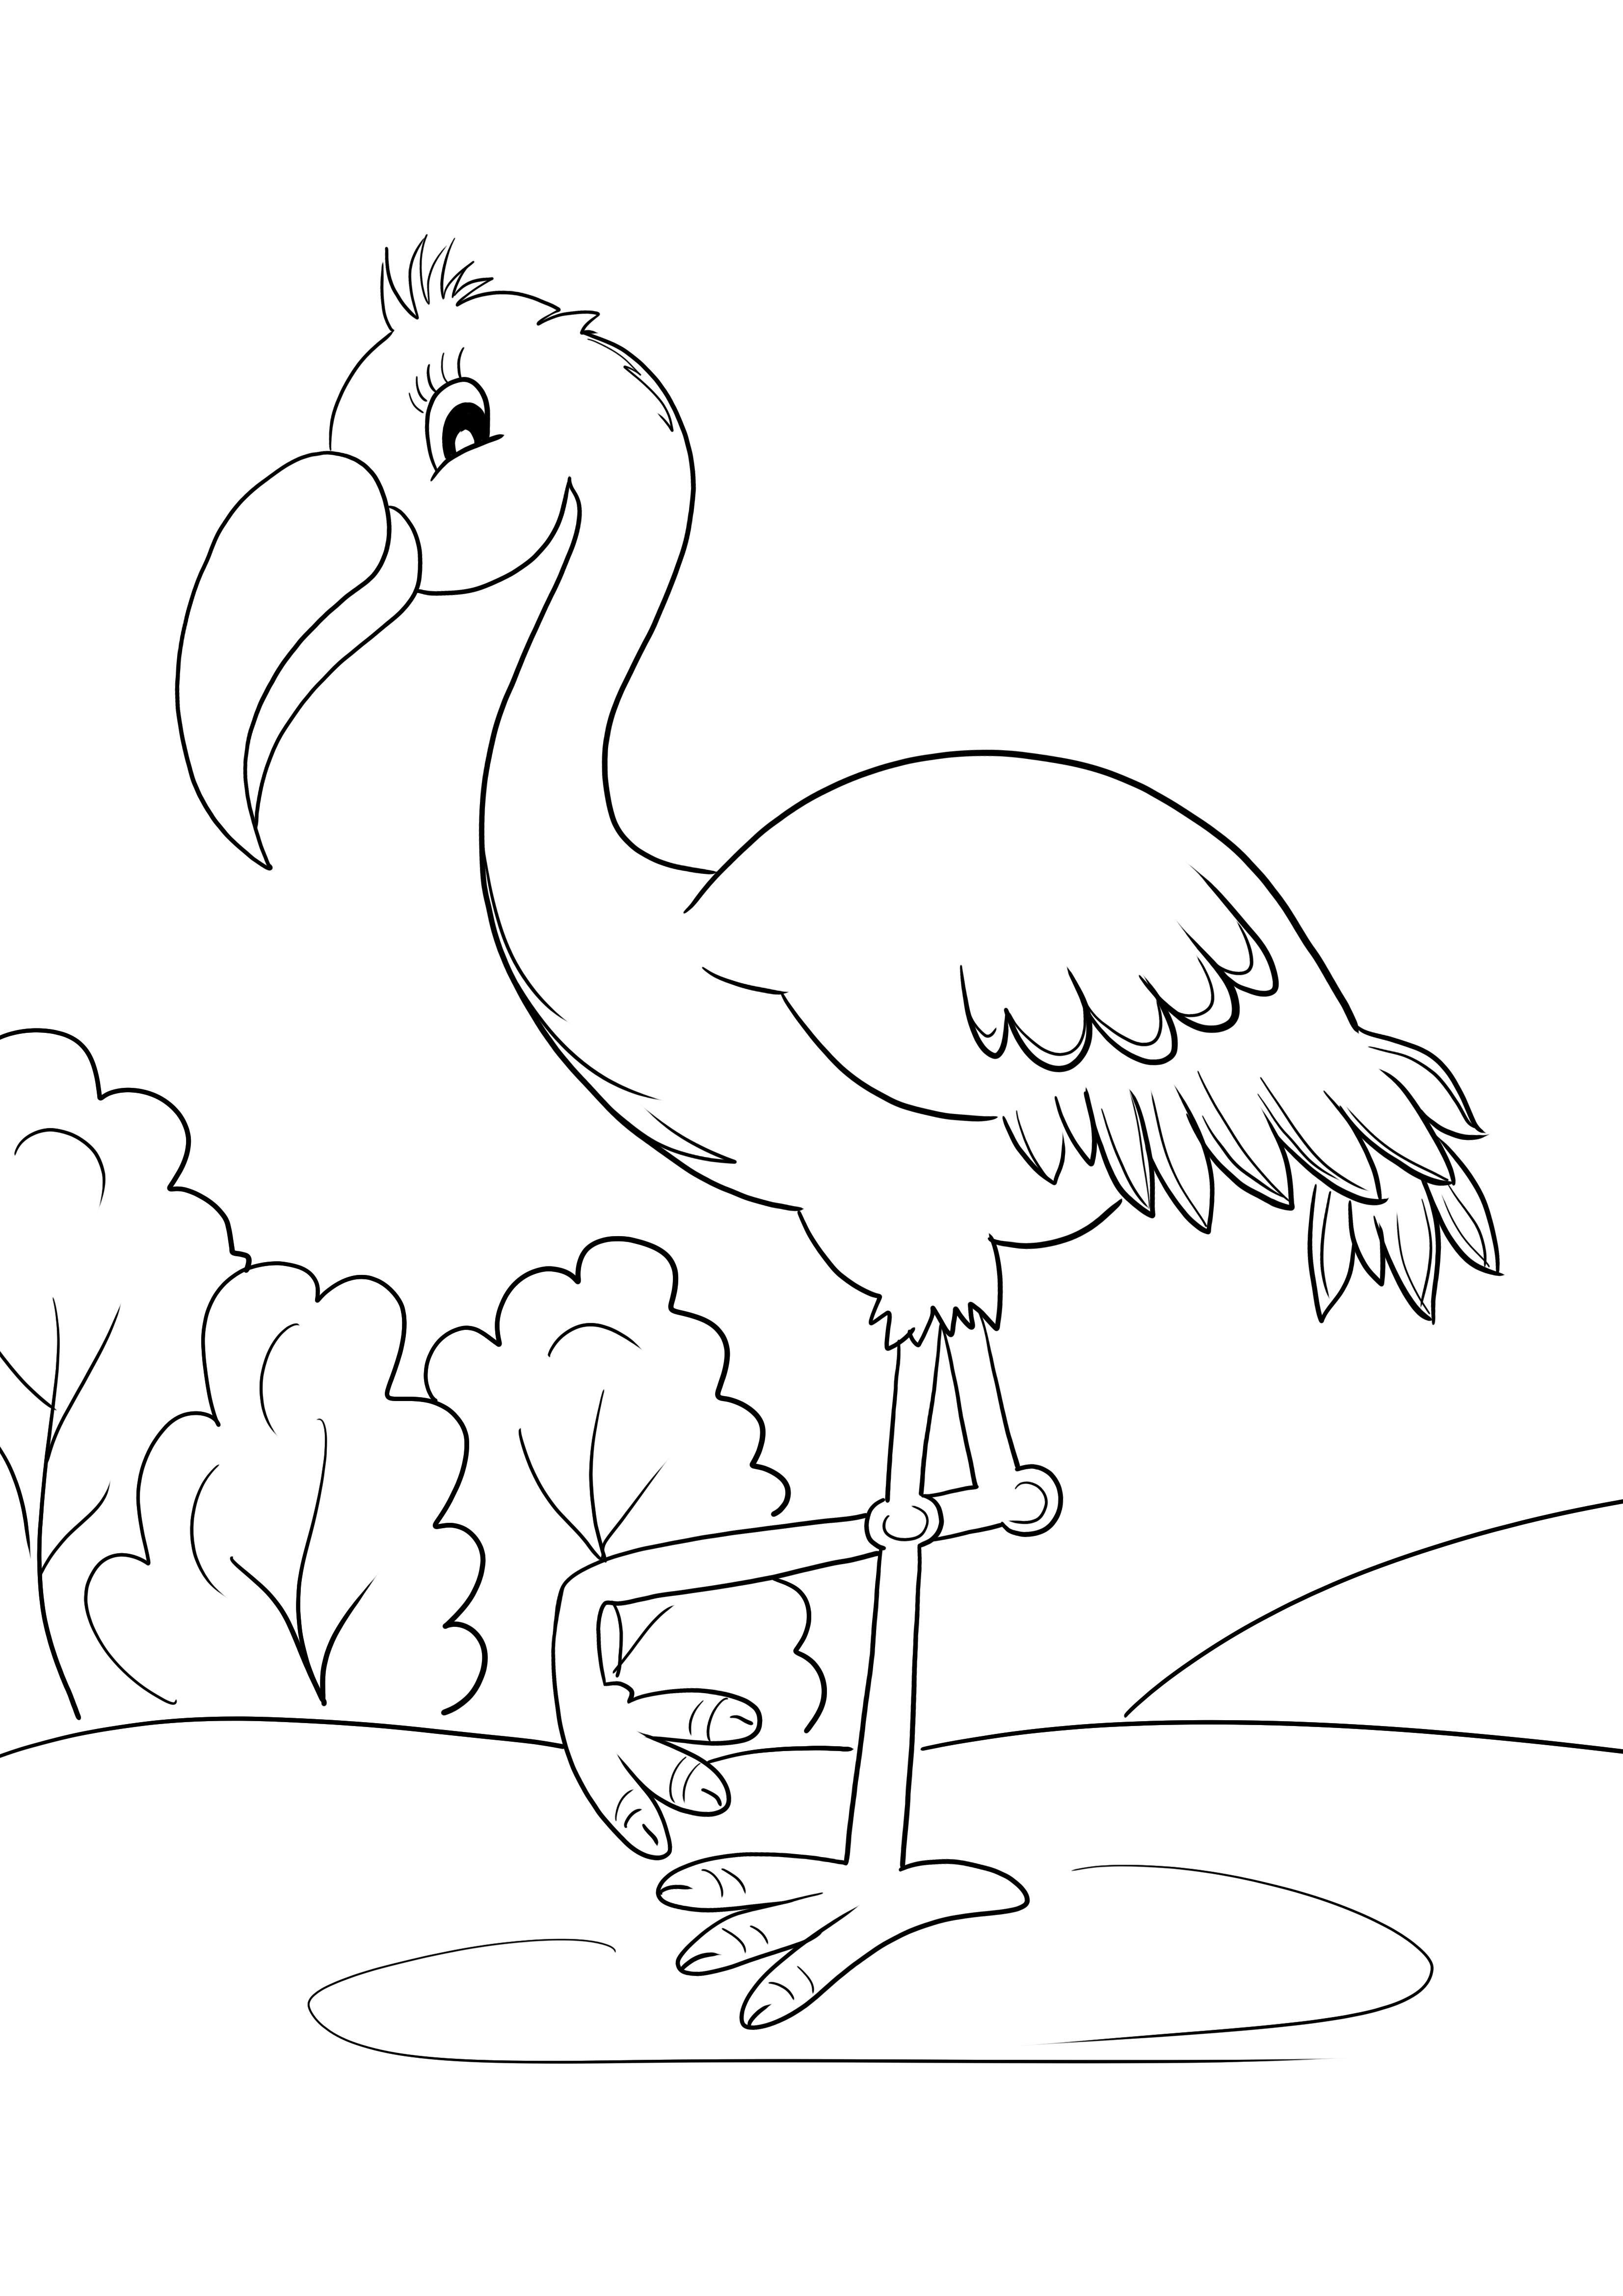 Flamingo bird to color and print for free